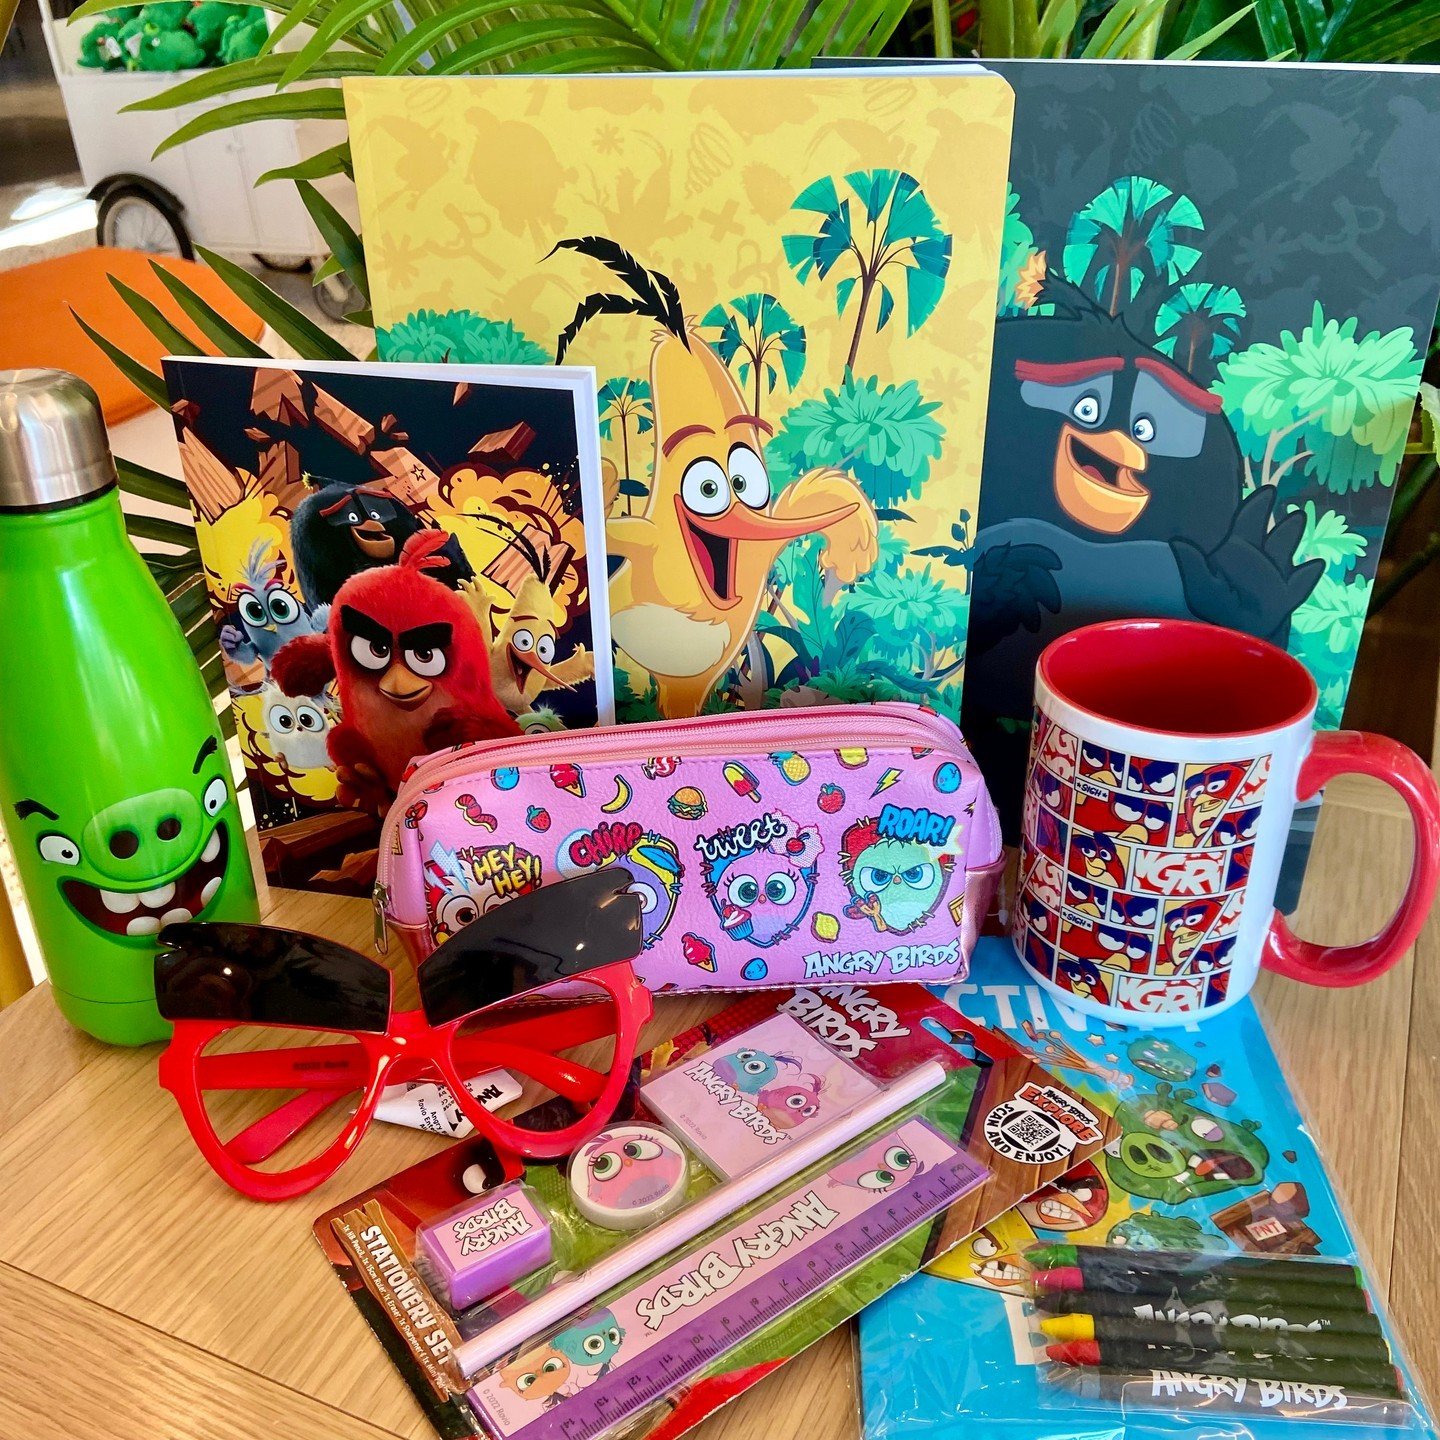 Gear up for fun anytime! 📚😎 Upgrade your stationery game with our Angry Birds' notebooks, water bottles, and more! 🥰

#iswiibyangrybirds #angrybirds #angrybirdsretailcafe #retailcafe #sweets #desserts #flushing #queens #tangramflushing #tangrammal